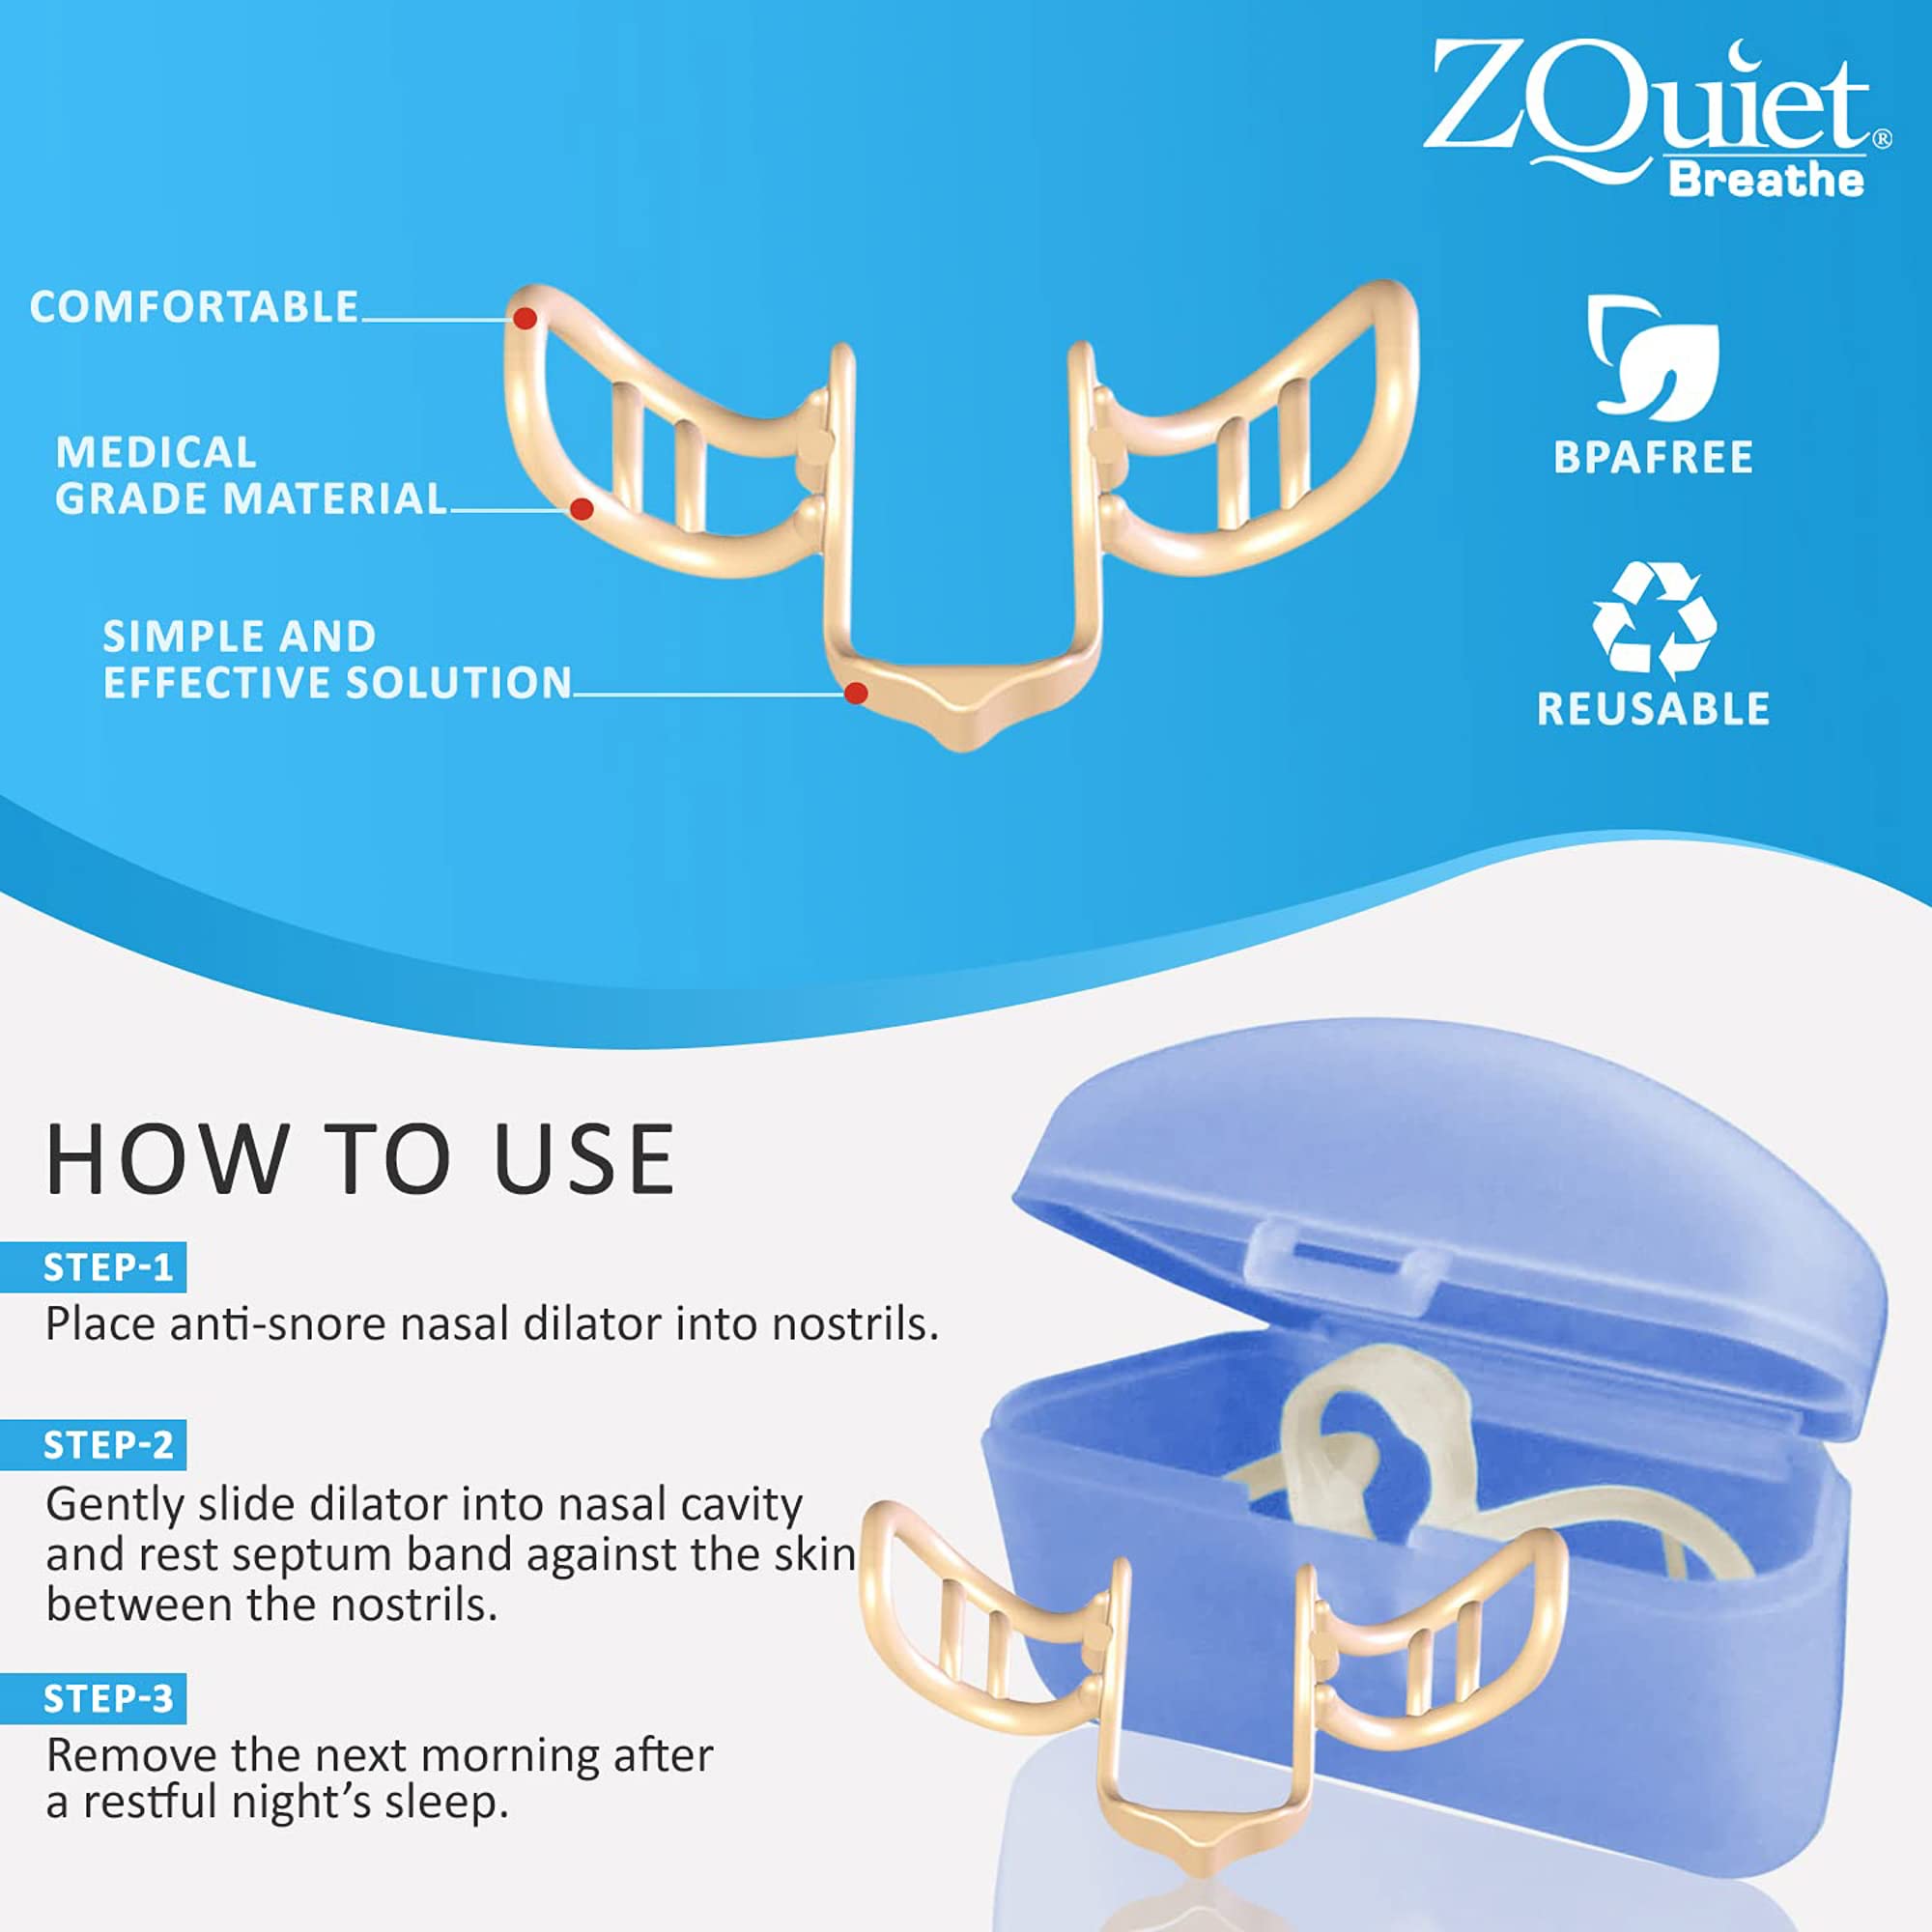 ZQuiet Breathe Anti-Snoring Nasal Dilator Breathe Aid with Storage Case (2 Count - 30-Day Supply) - Natural, Simple, Comfortable Snoring Solution to Increase Airflow and Relieve Sinus Congestion